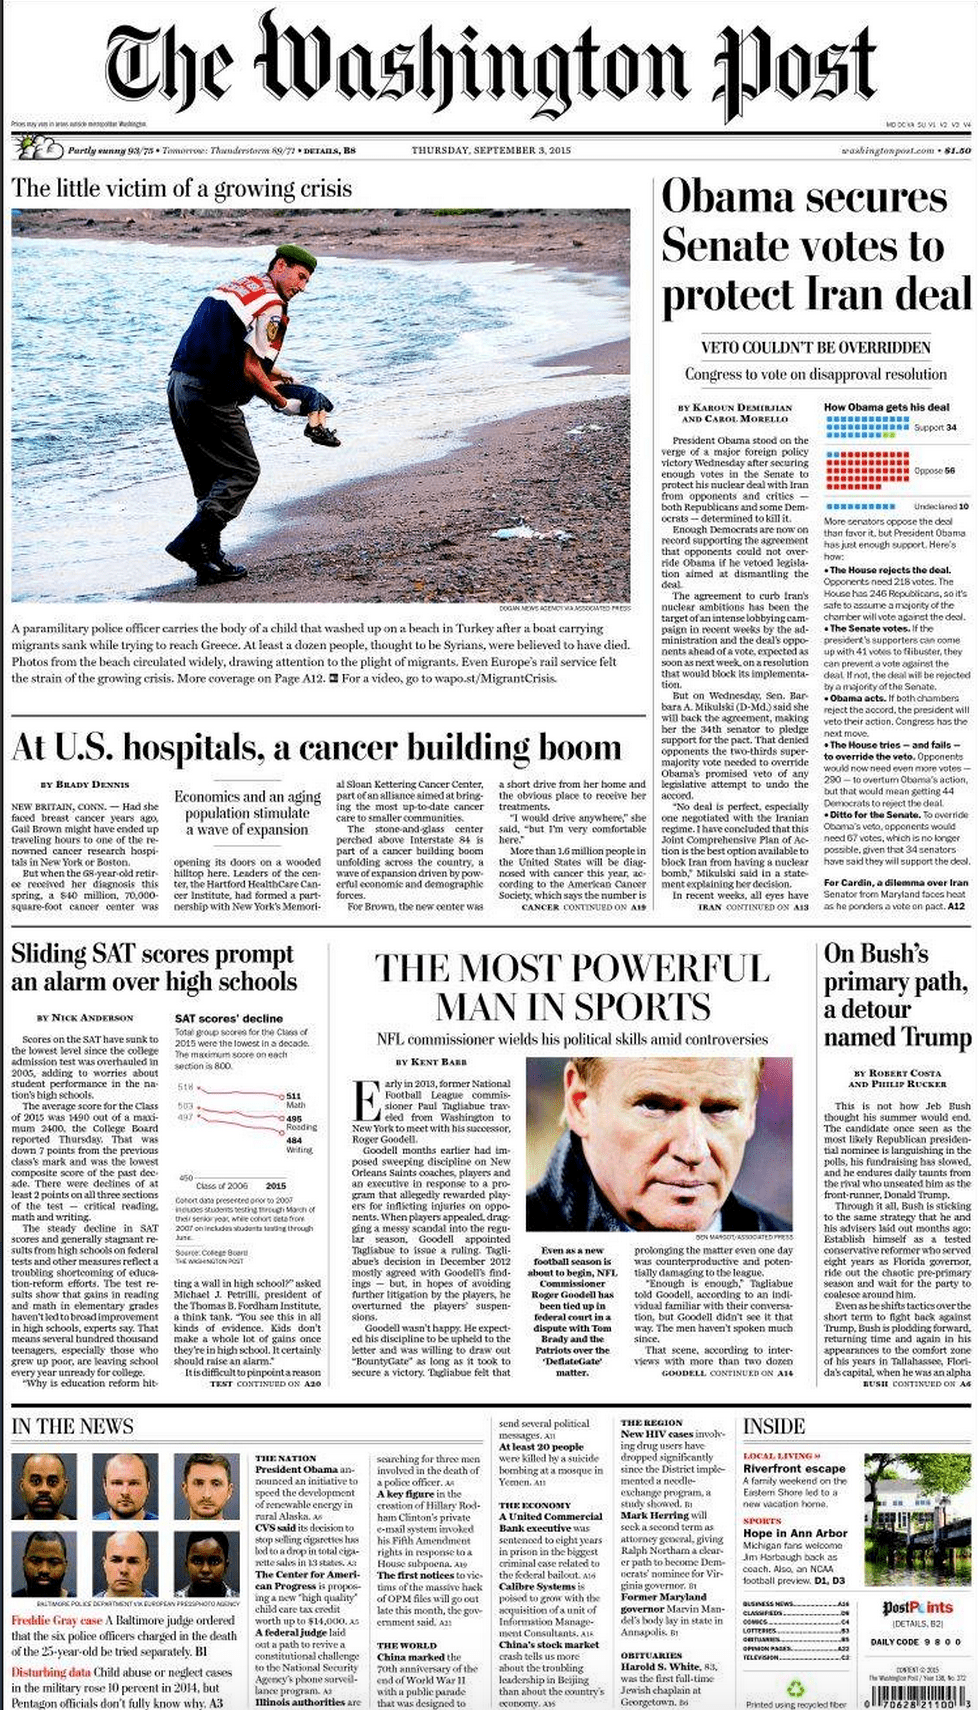 Drowned Migrant Boy The Washington Post front page